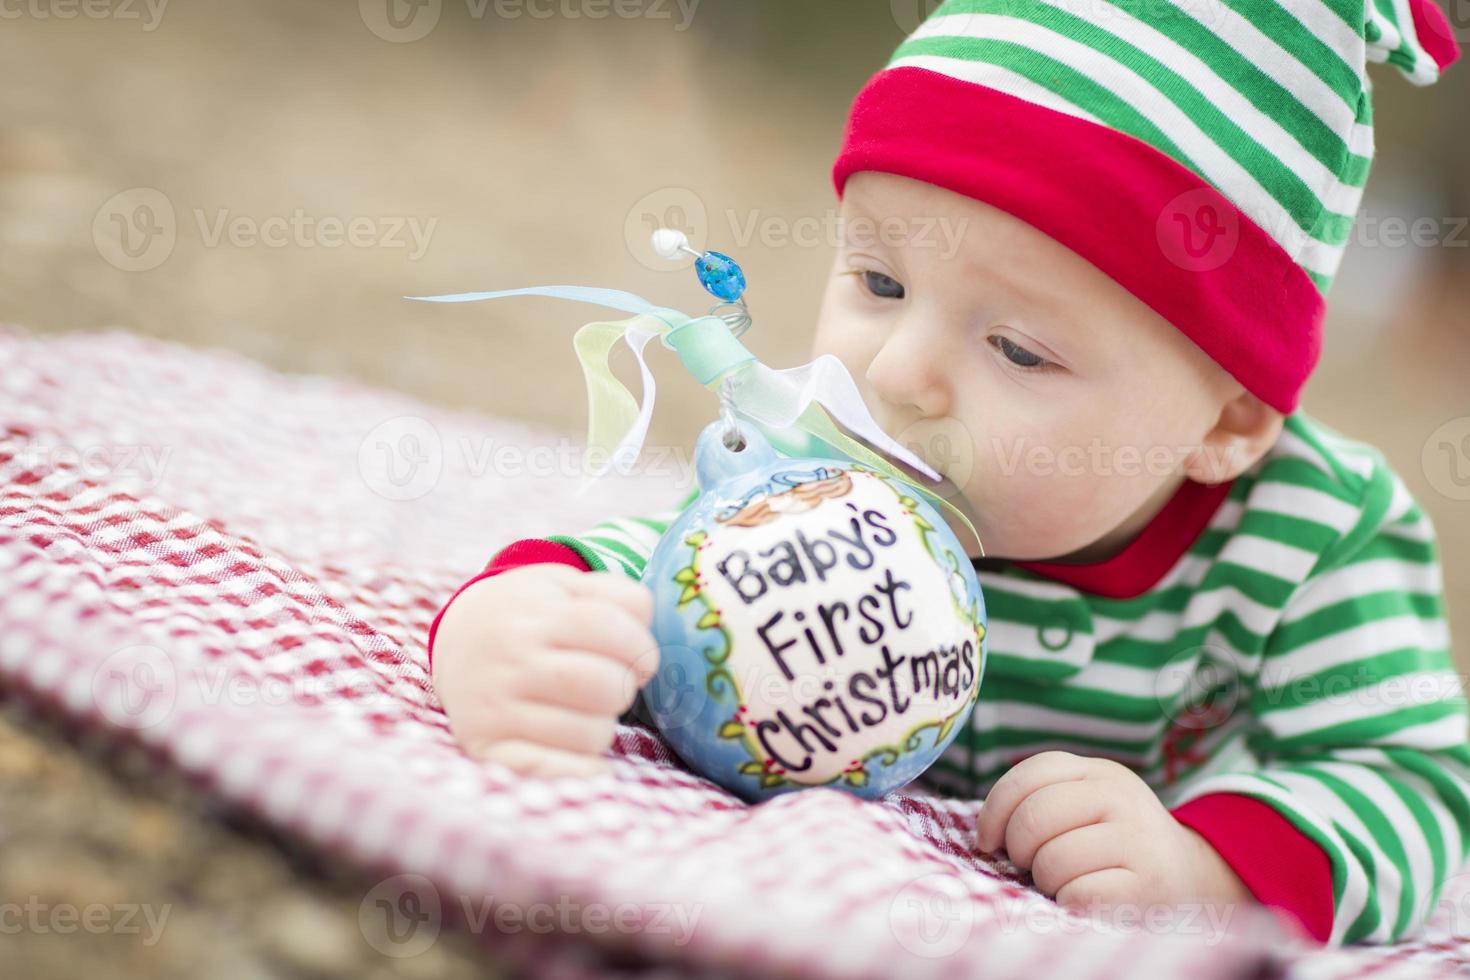 Infant Baby On Blanket With Babys First Christmas Ornament photo